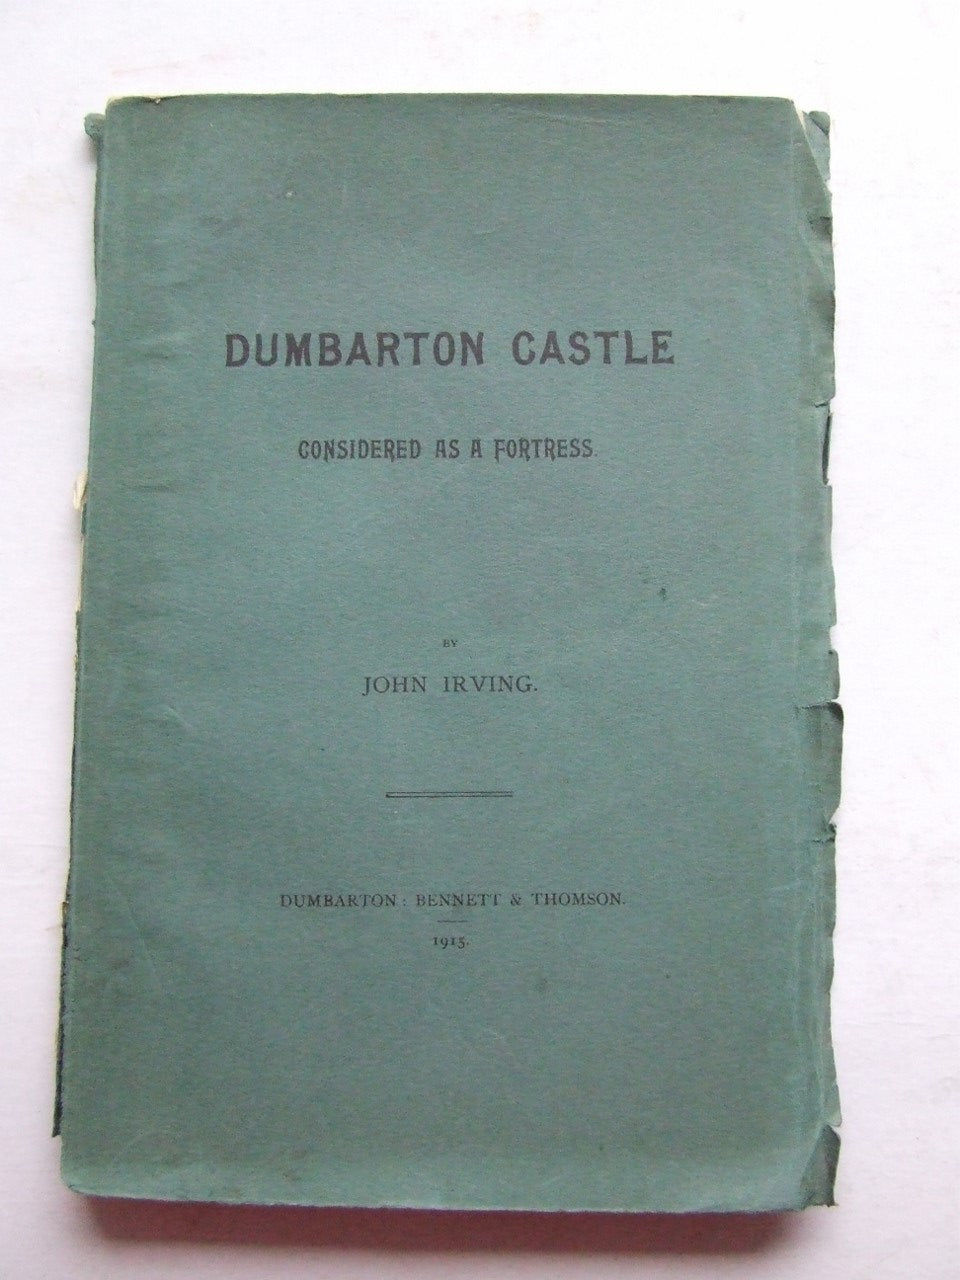 Dumbarton Castle considered as a fortress